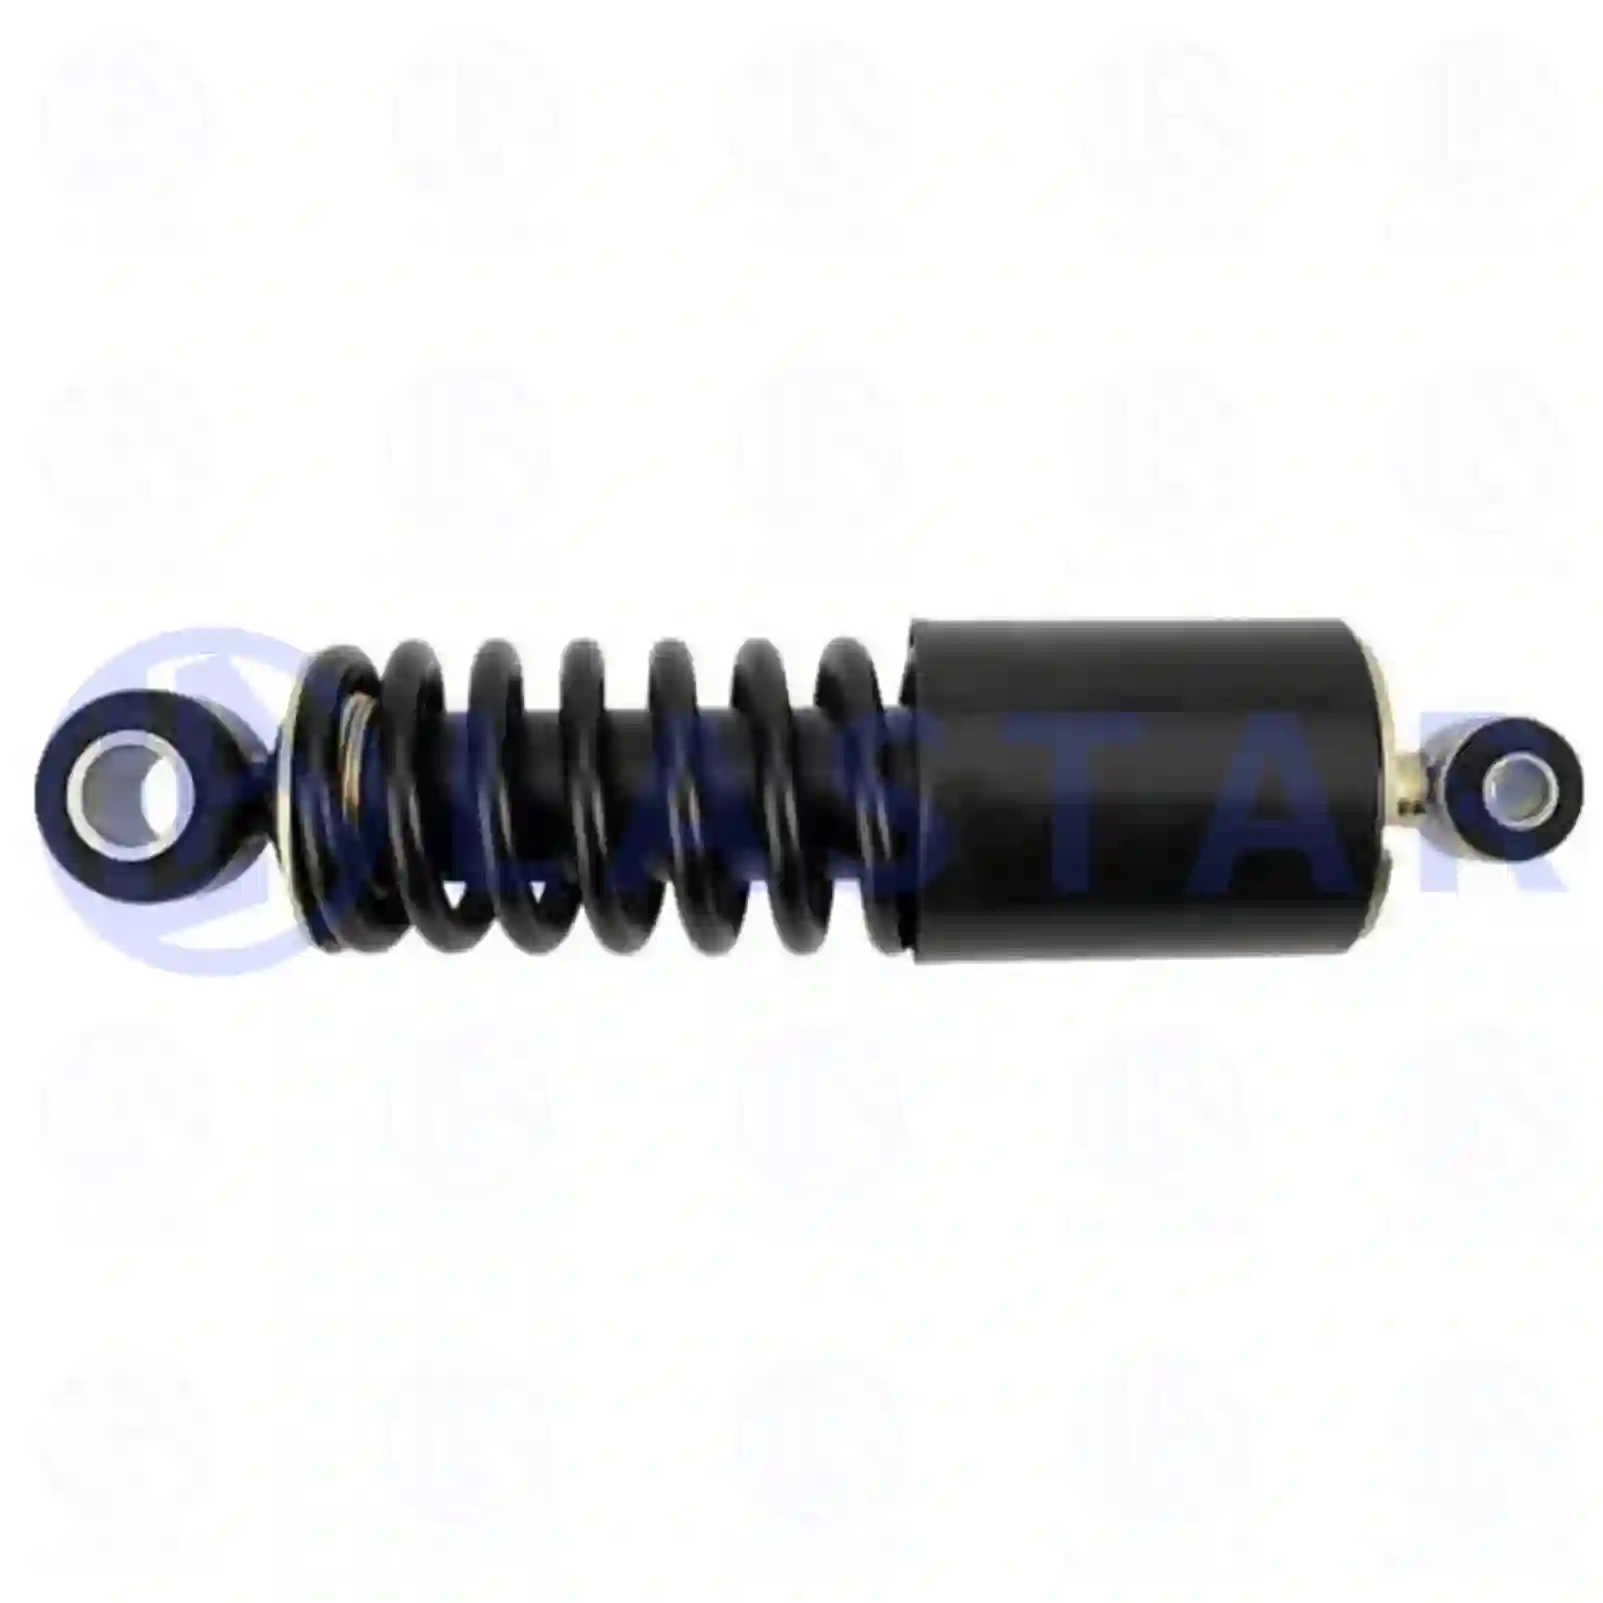 Cabin shock absorber, 77734864, 9428902219, 9428902819, , ||  77734864 Lastar Spare Part | Truck Spare Parts, Auotomotive Spare Parts Cabin shock absorber, 77734864, 9428902219, 9428902819, , ||  77734864 Lastar Spare Part | Truck Spare Parts, Auotomotive Spare Parts